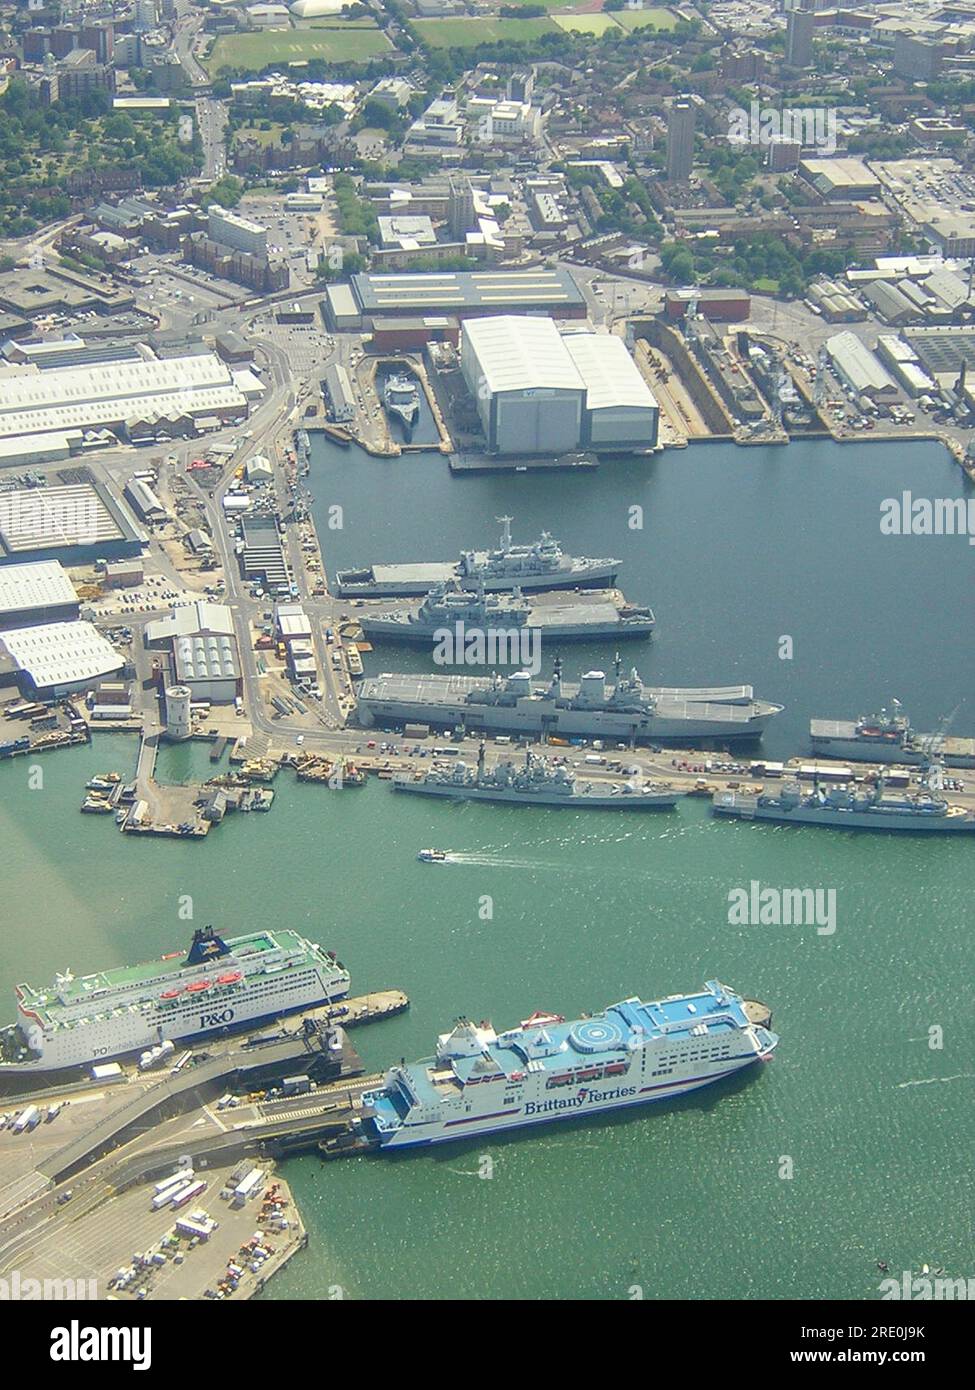 Aerial view looking down on His Majesty's Naval Base, Portsmouth (HMNB Portsmouth) with warships and HMS Ark Royal aircraft carrier, and ferries Stock Photo